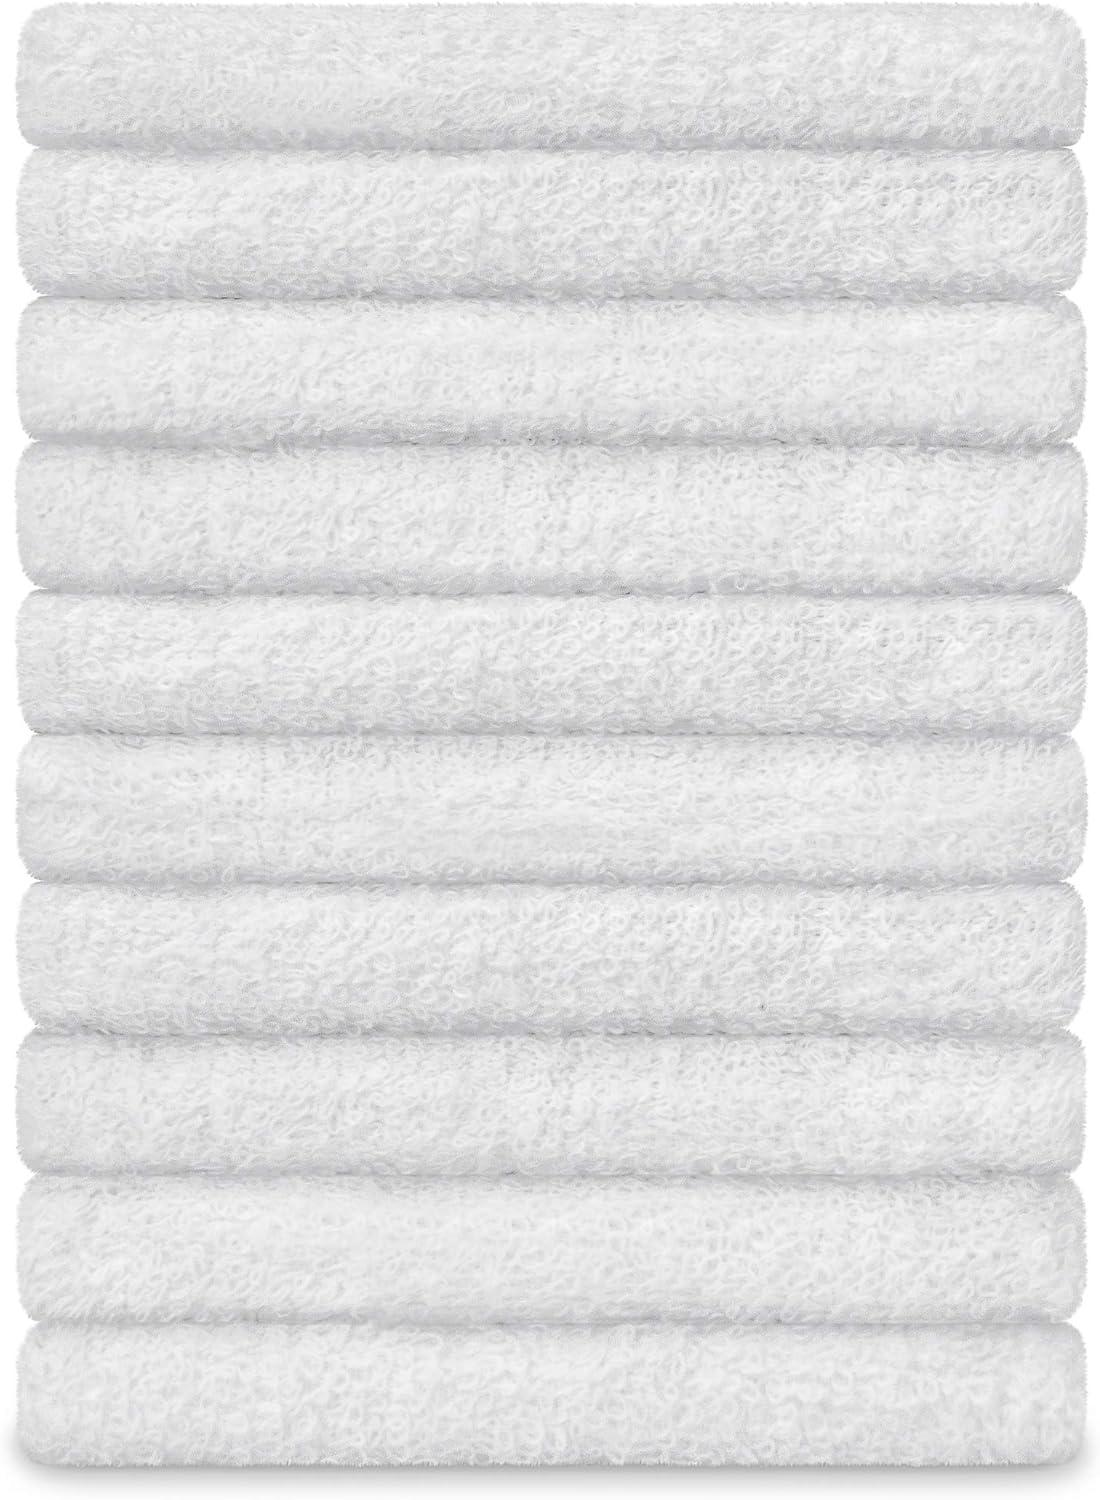 DecorRack 10 Pack 100% Cotton Wash Cloth, Luxurious Soft, 12 x 12 inch  Ultra Absorbent, Machine Washable Washcloths, White (10 Pack)